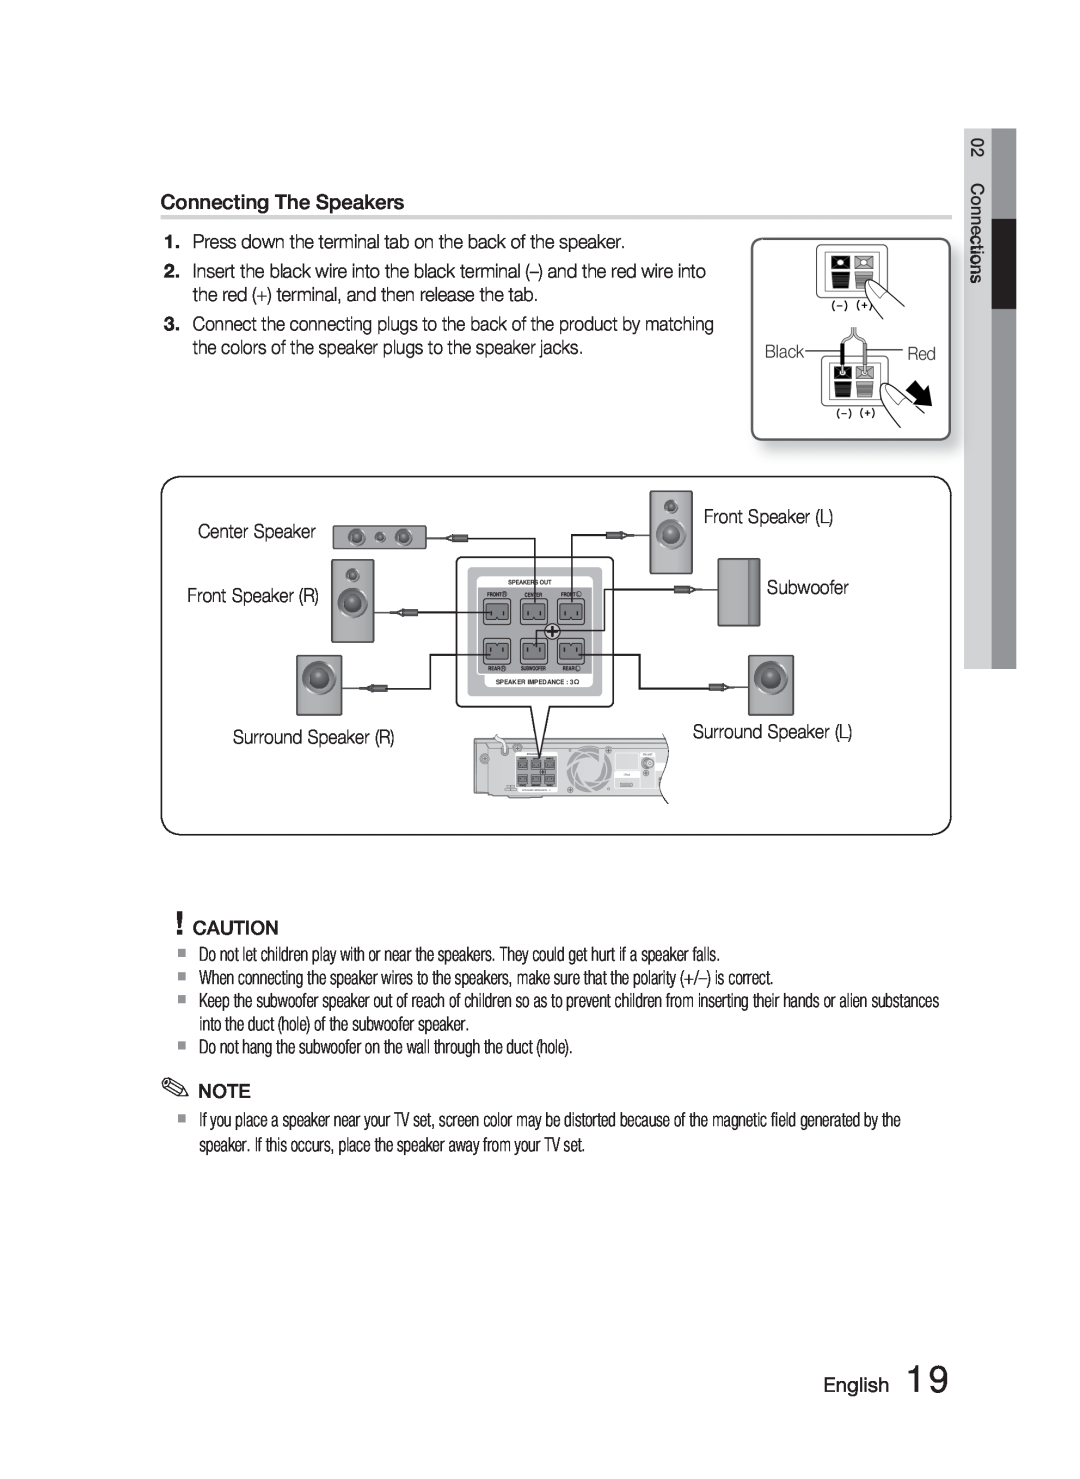 Samsung HT-C5500 user manual Connecting The Speakers, English 